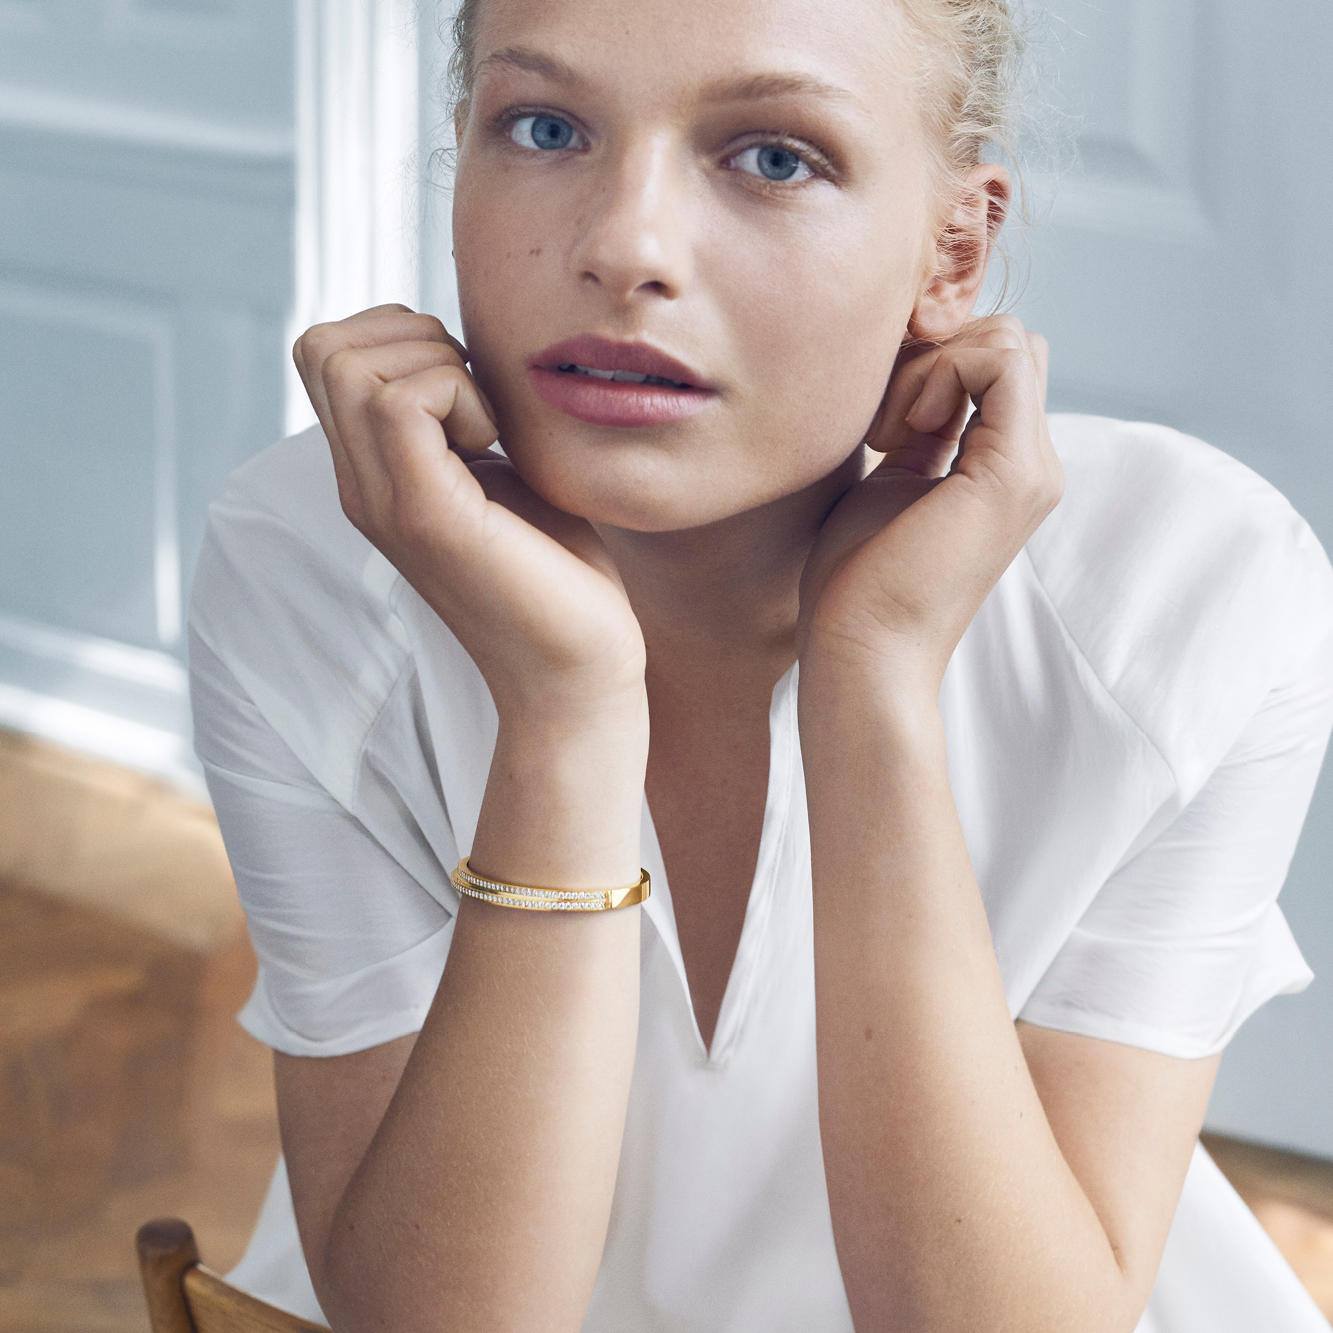 The Halo collection, designed by @SophieBilleBraheltd, has a feeling of natural, uncomplicated luxury. Circular shapes of gold dressed with diamonds are overlapped and juxtaposed to form pieces that are both modern and effortless in their beauty.  Learn more about the collection: